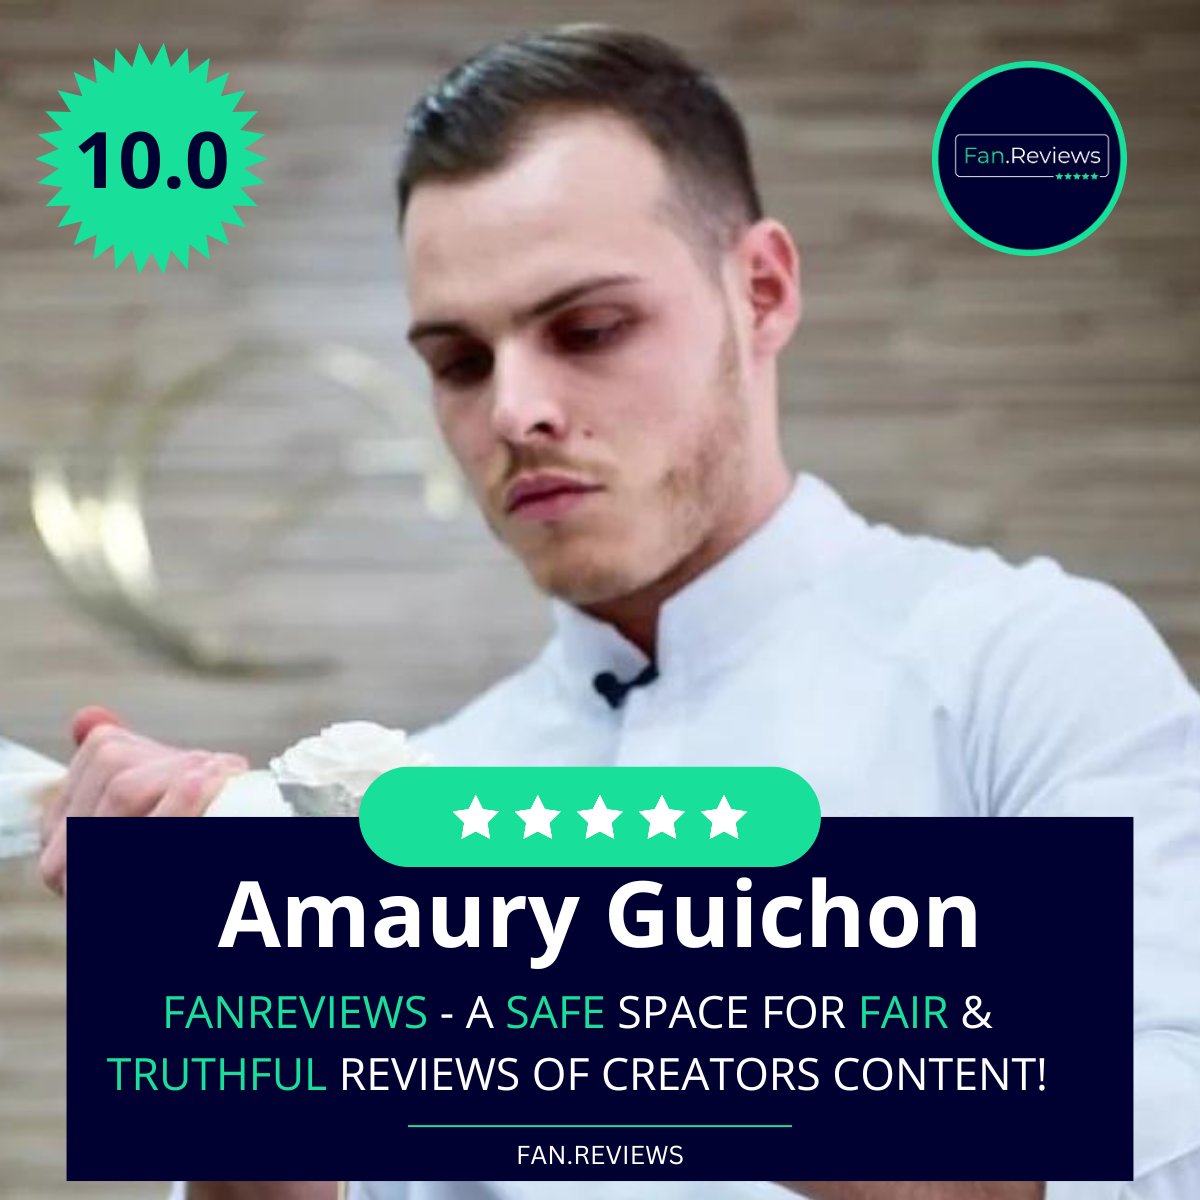 Congratulations to Amaury Guichon for having a 10.0 rating on FanReviews. Check out the reviews on our site 🎉 FanReviews - A safe space for fair & truthful reviews of Creator content! 💯 Profile link:👉fan.reviews/creator/culina…